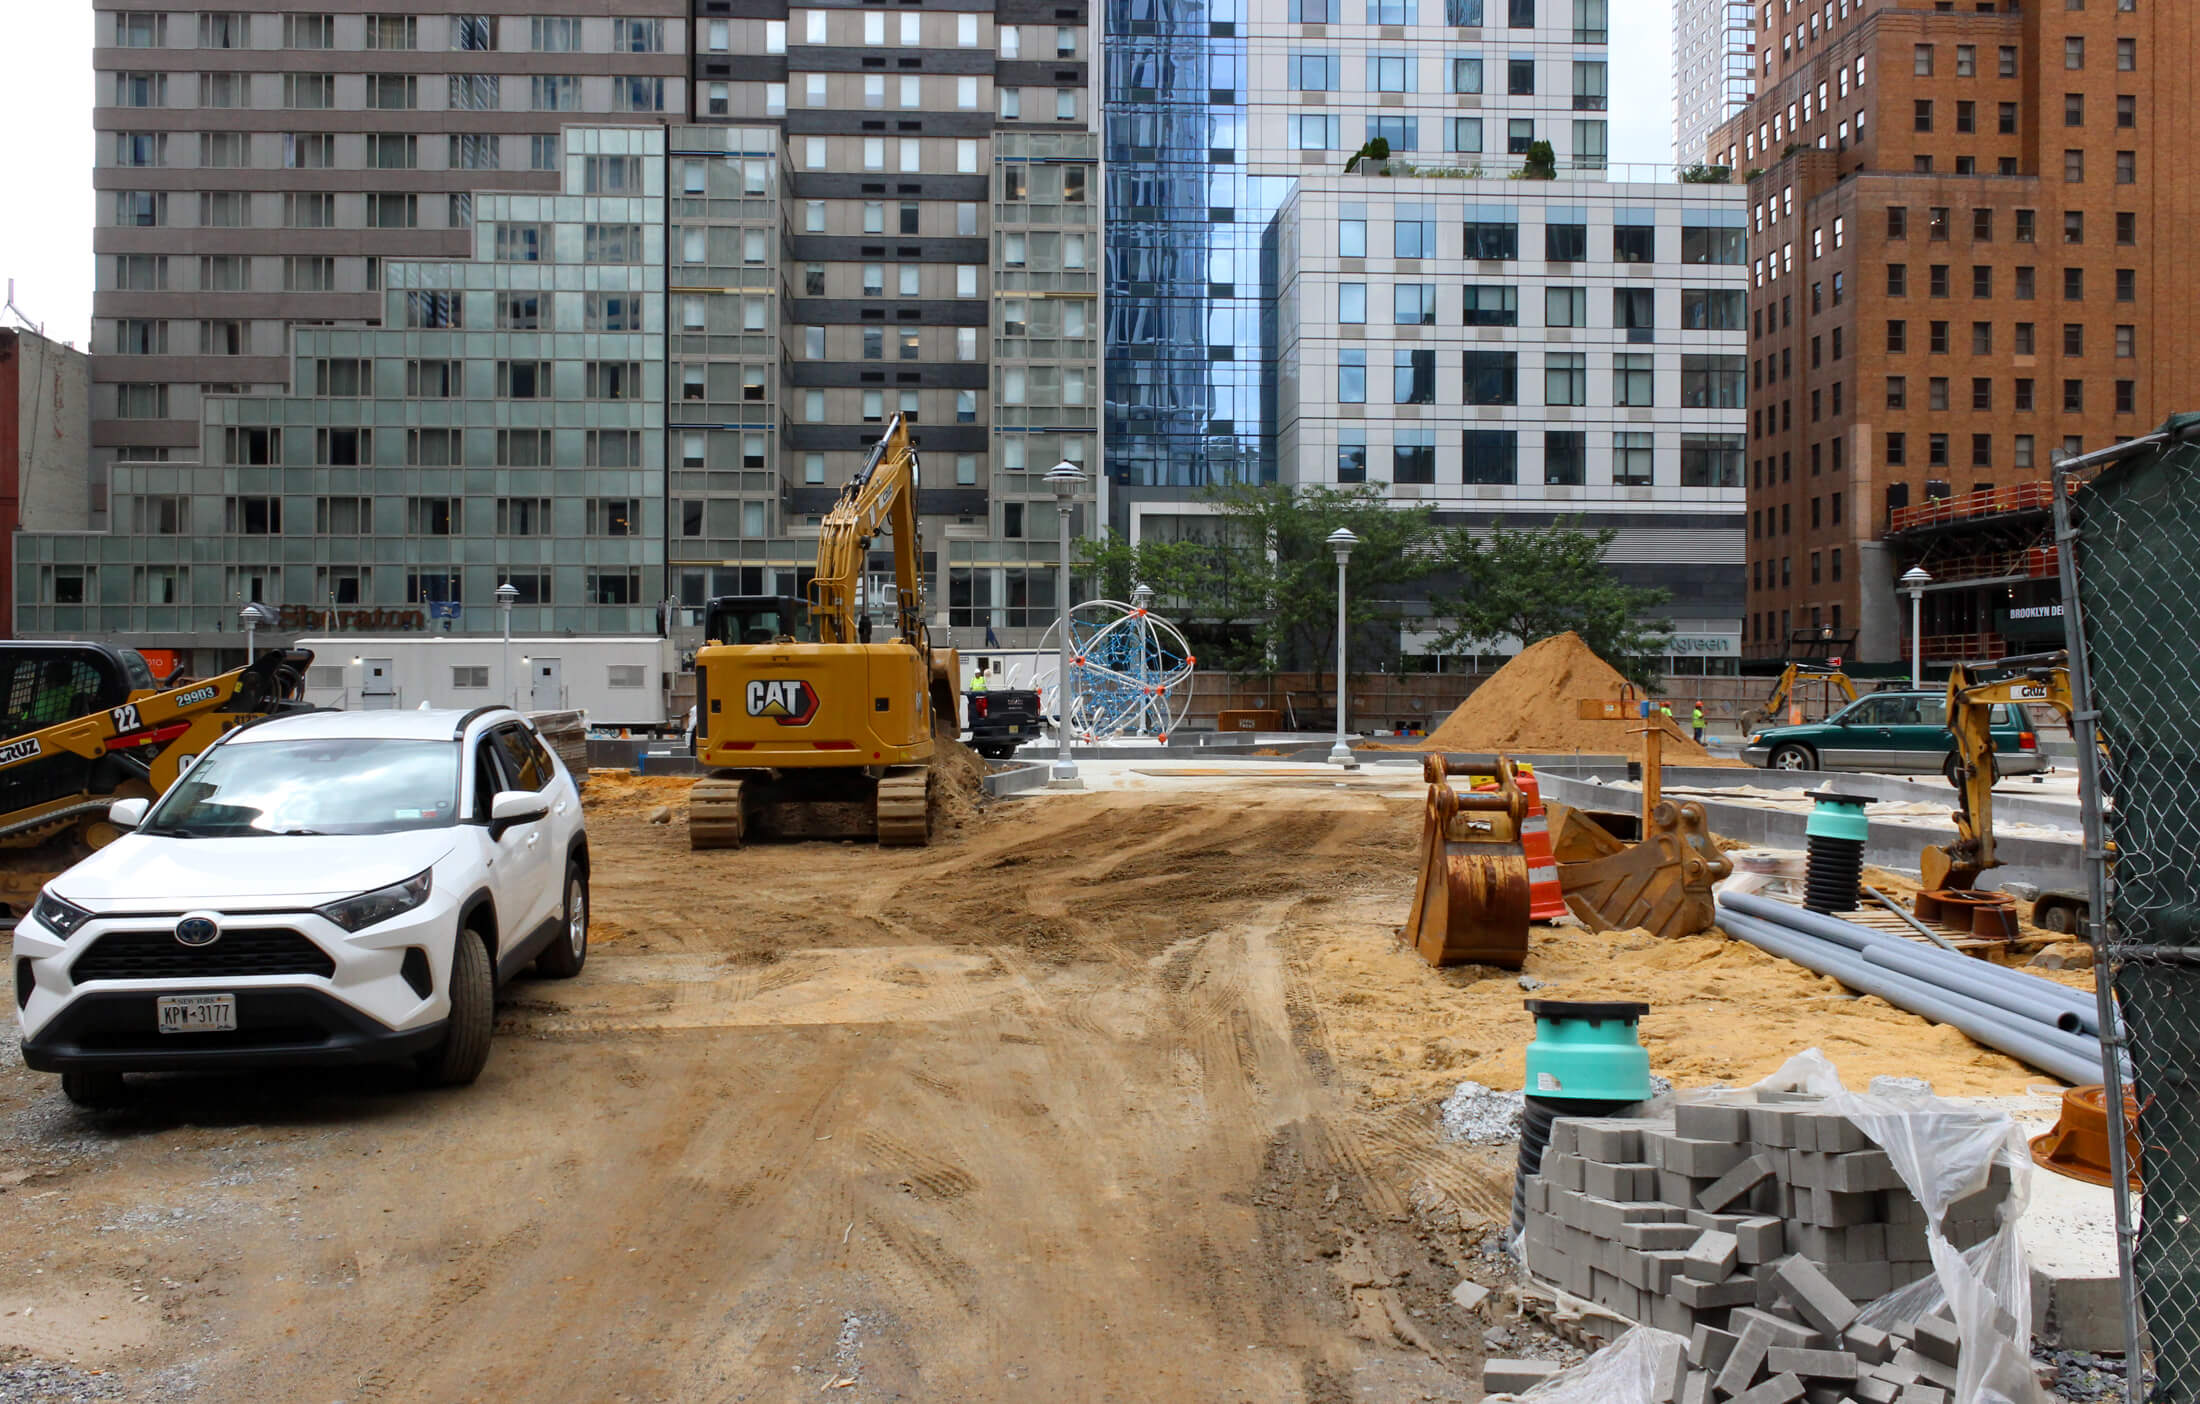 view from albee showing piles of construction materials and a glimpse of playground equipment